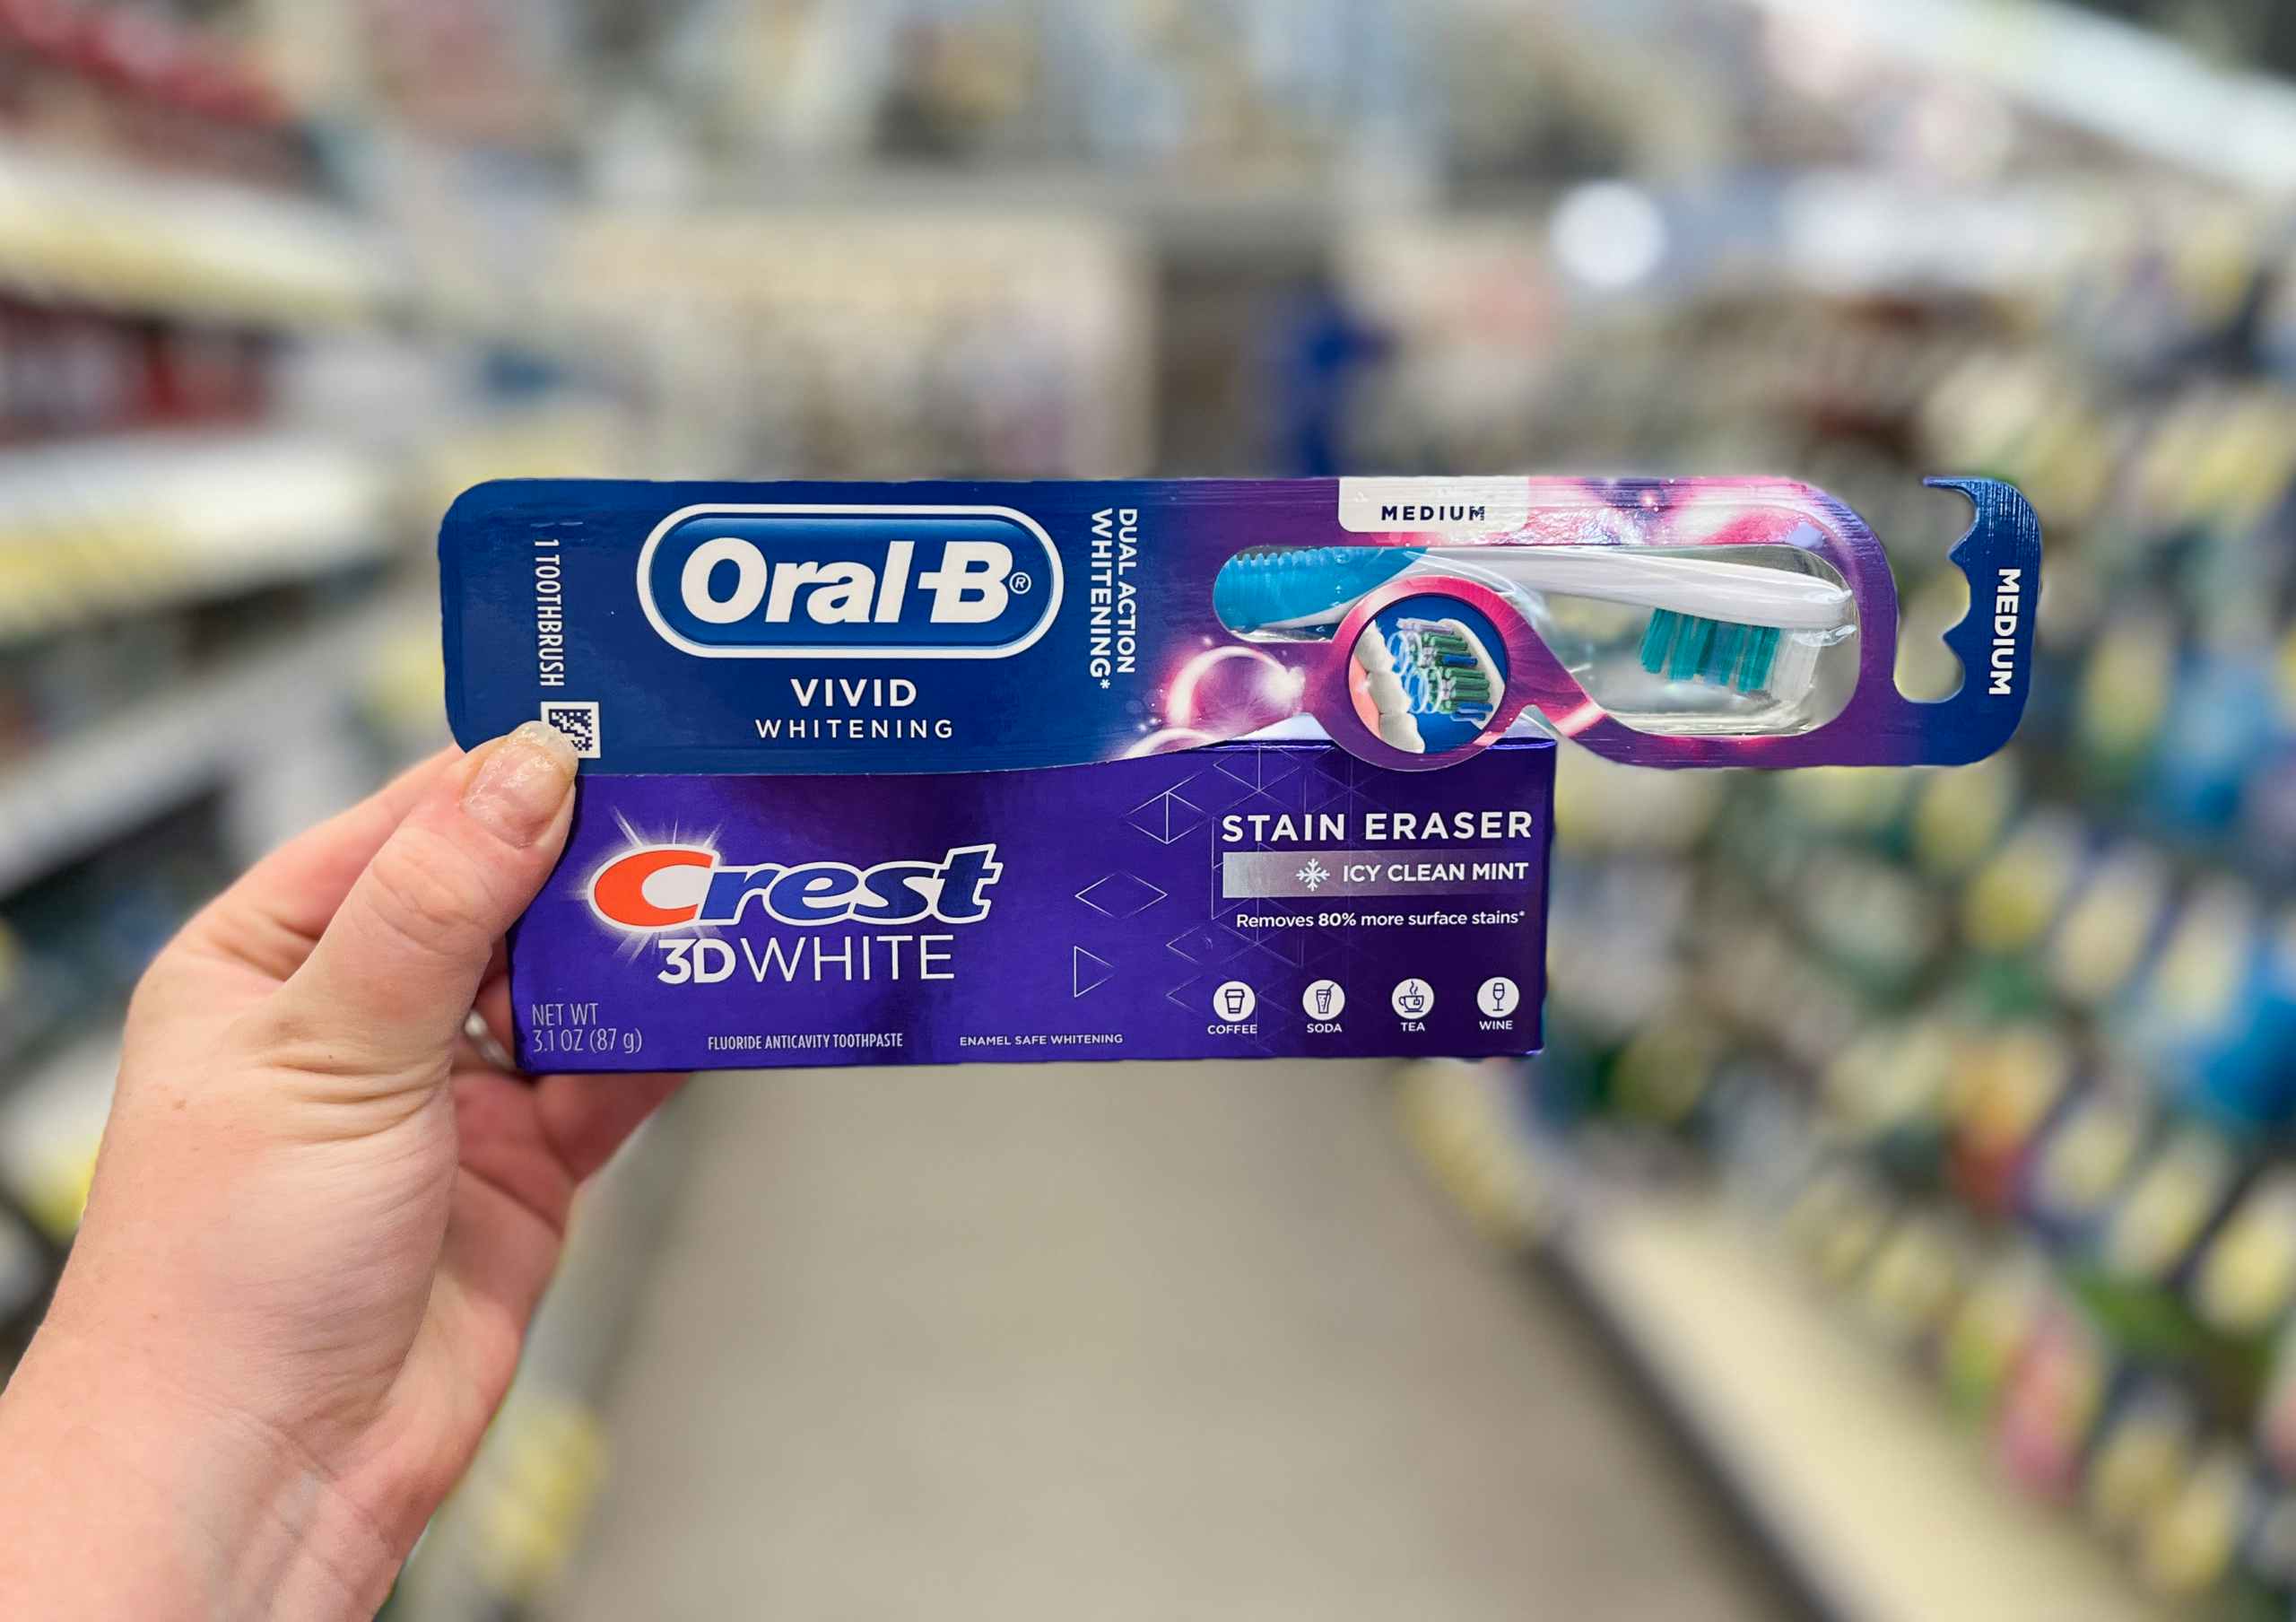 Get Free Crest and Oral-B at Walgreens